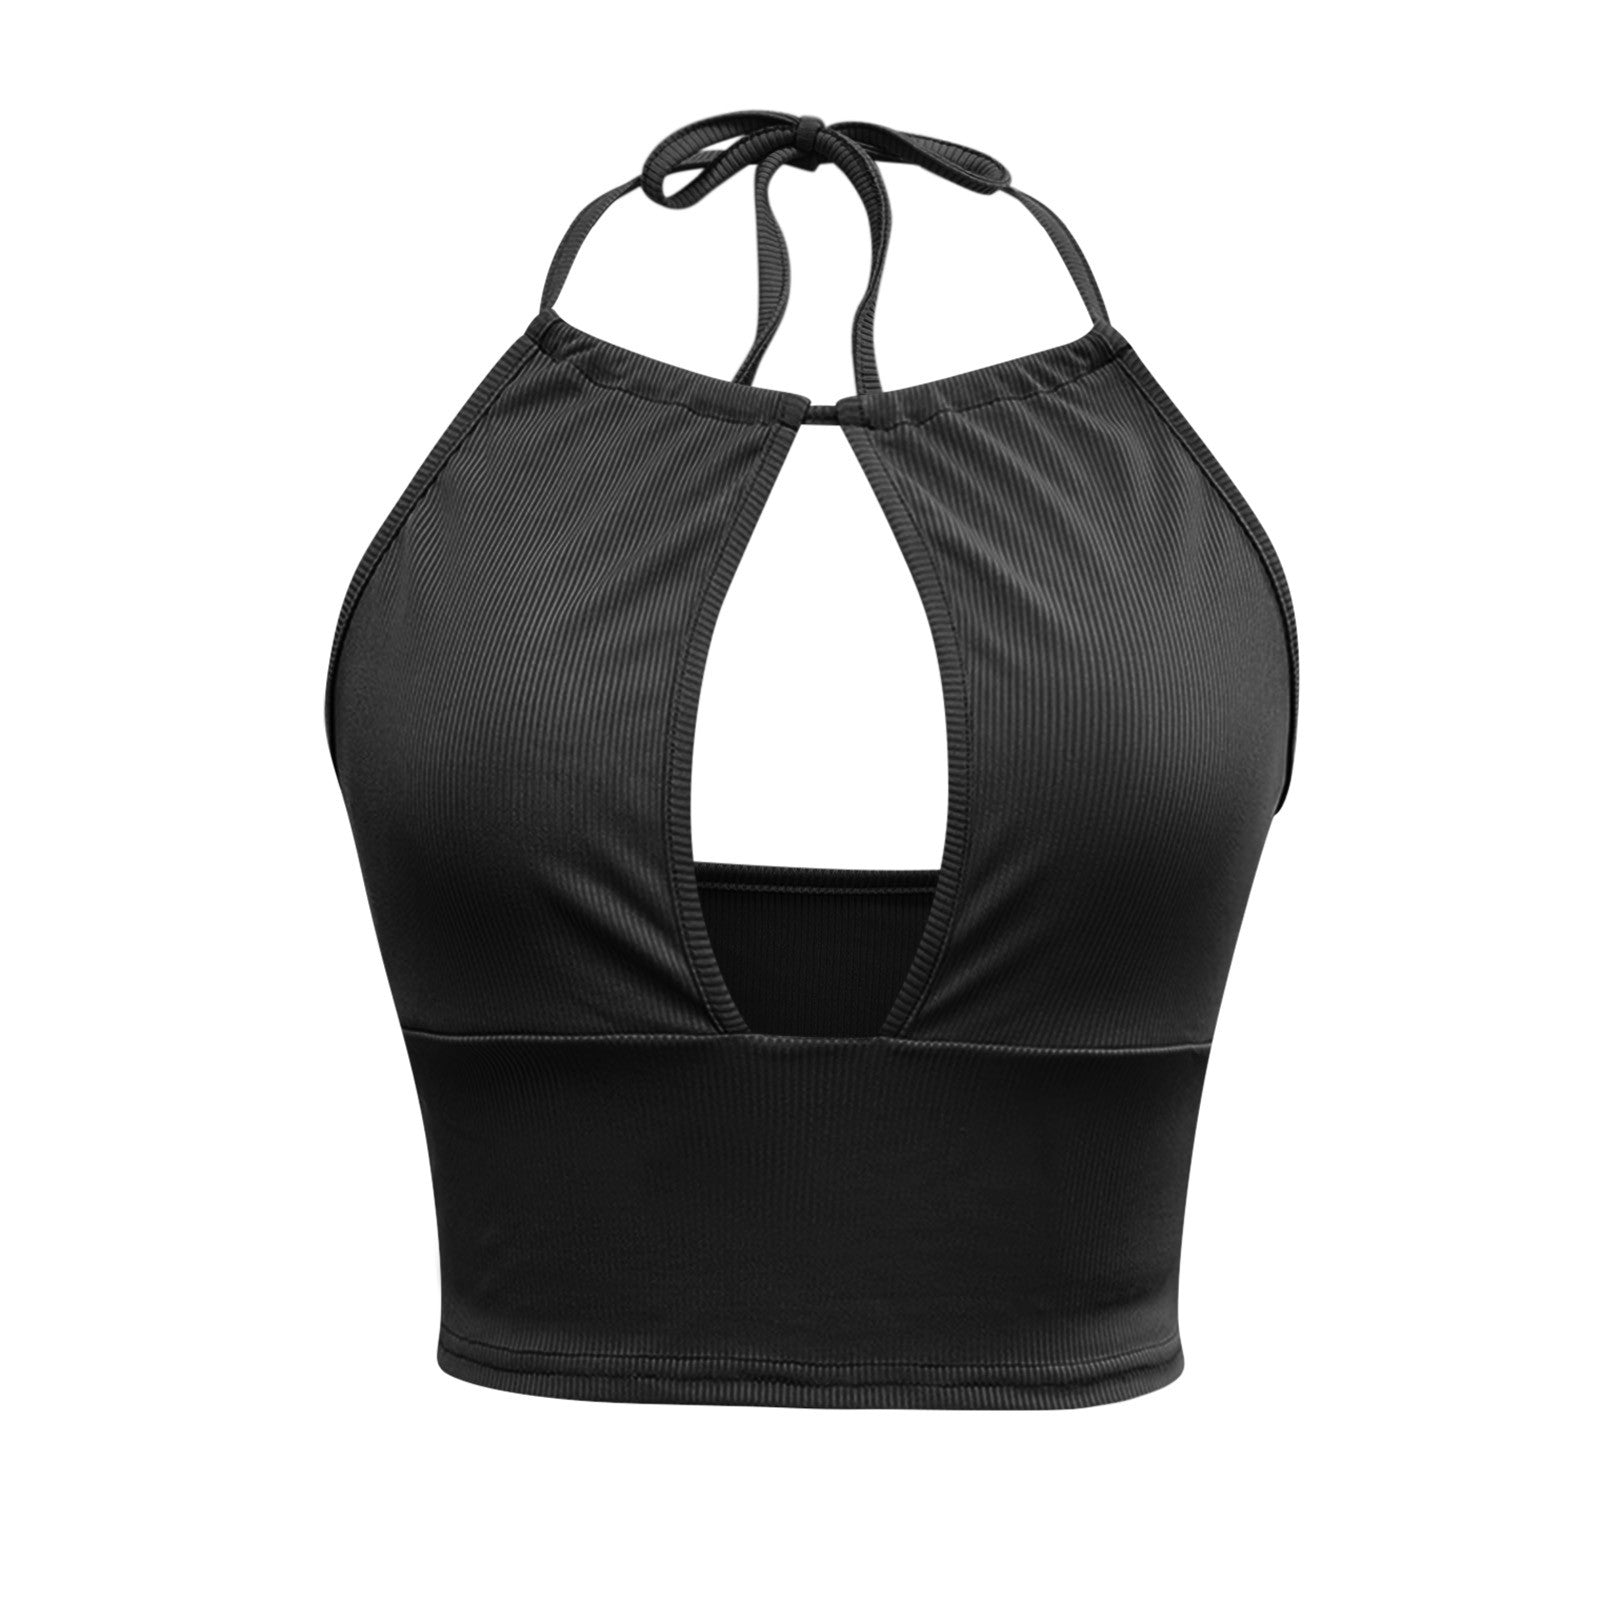 Camisole Halter Vest Women Summer Sexy Hollow Tops - Classic chic